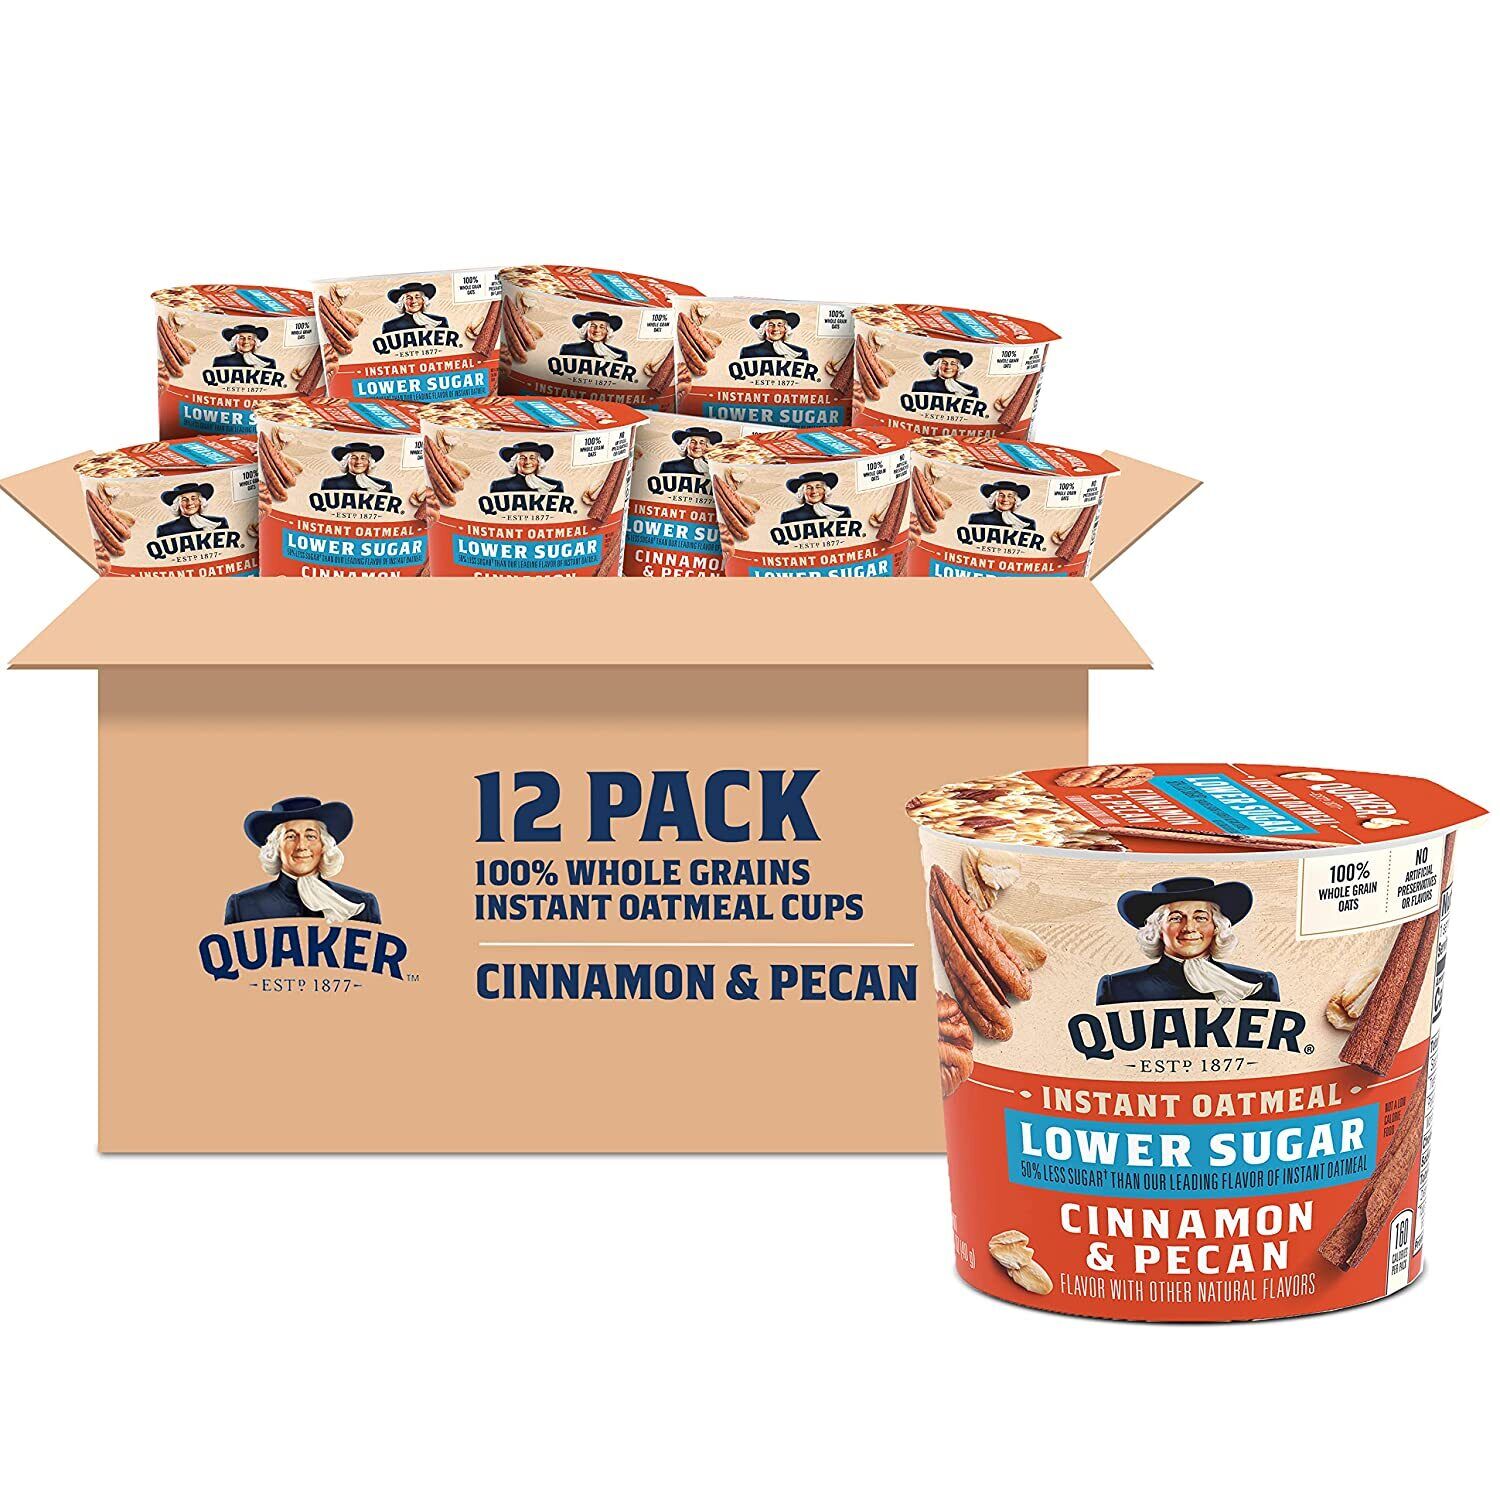 Quaker Instant Oatmeal Express Cups, Cinnamon Pecan, 1.41 Ounce 12 Pack